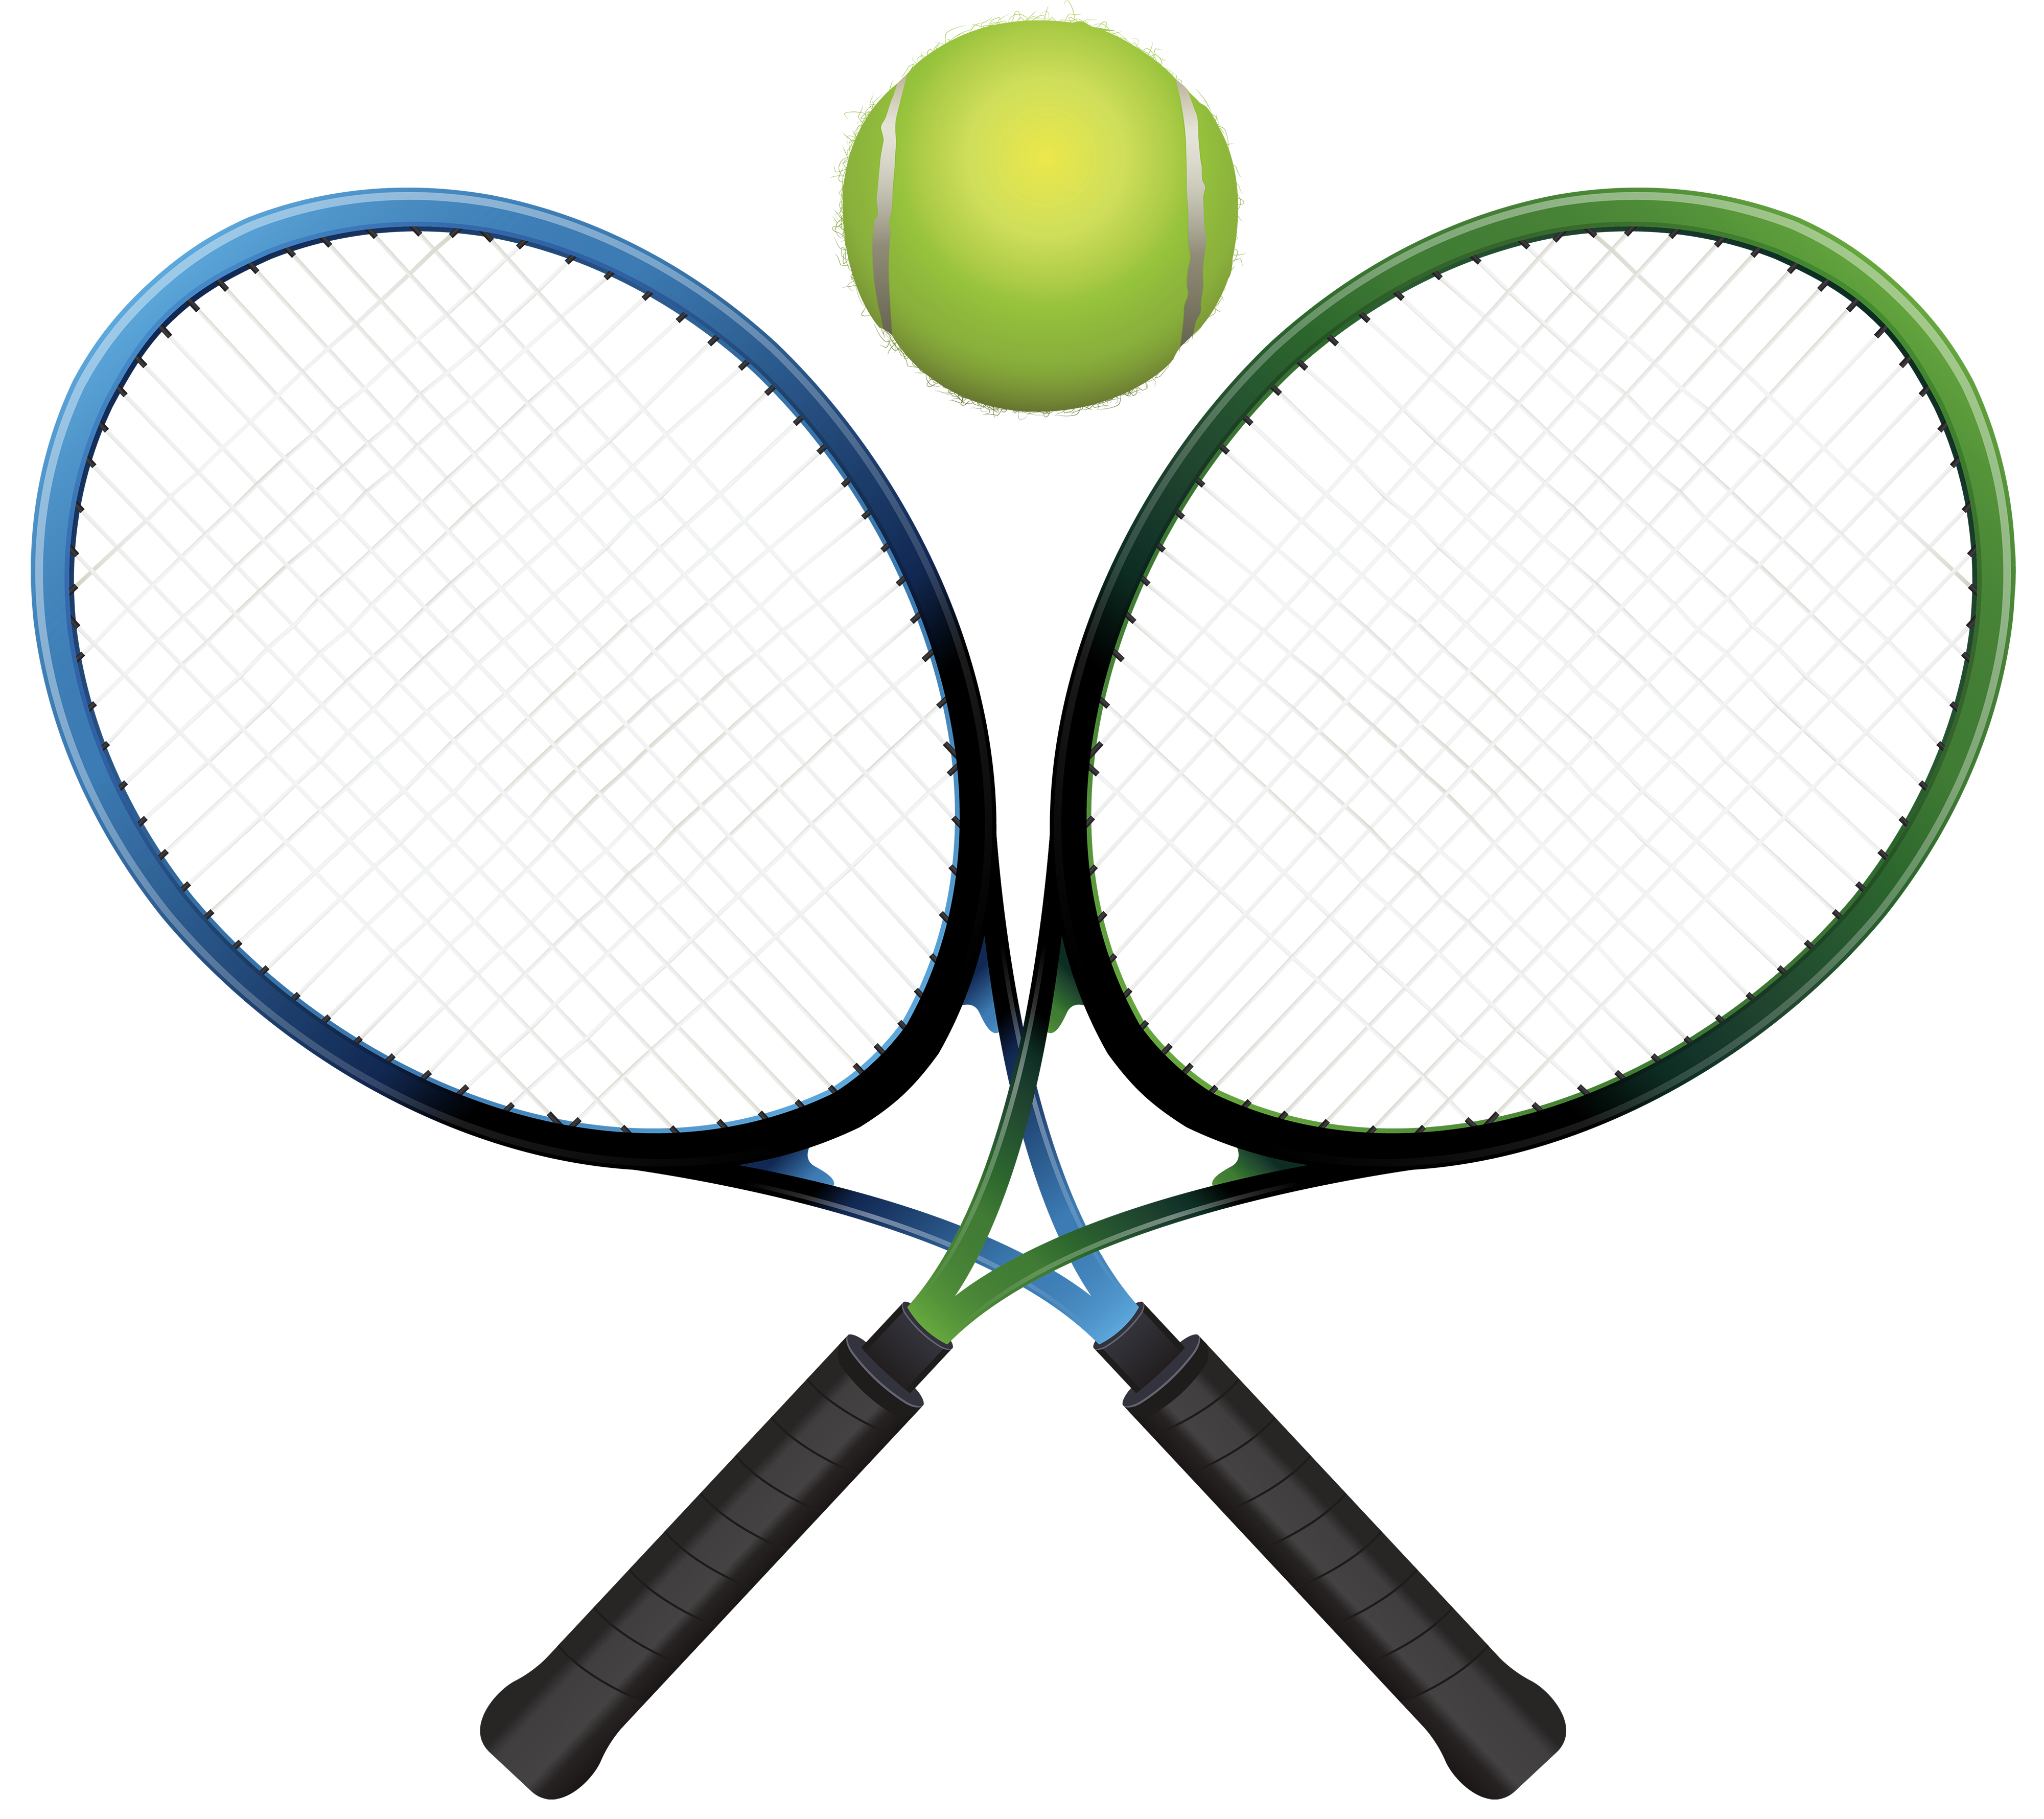 Tennis Ball And Racket PNG Transparent Image